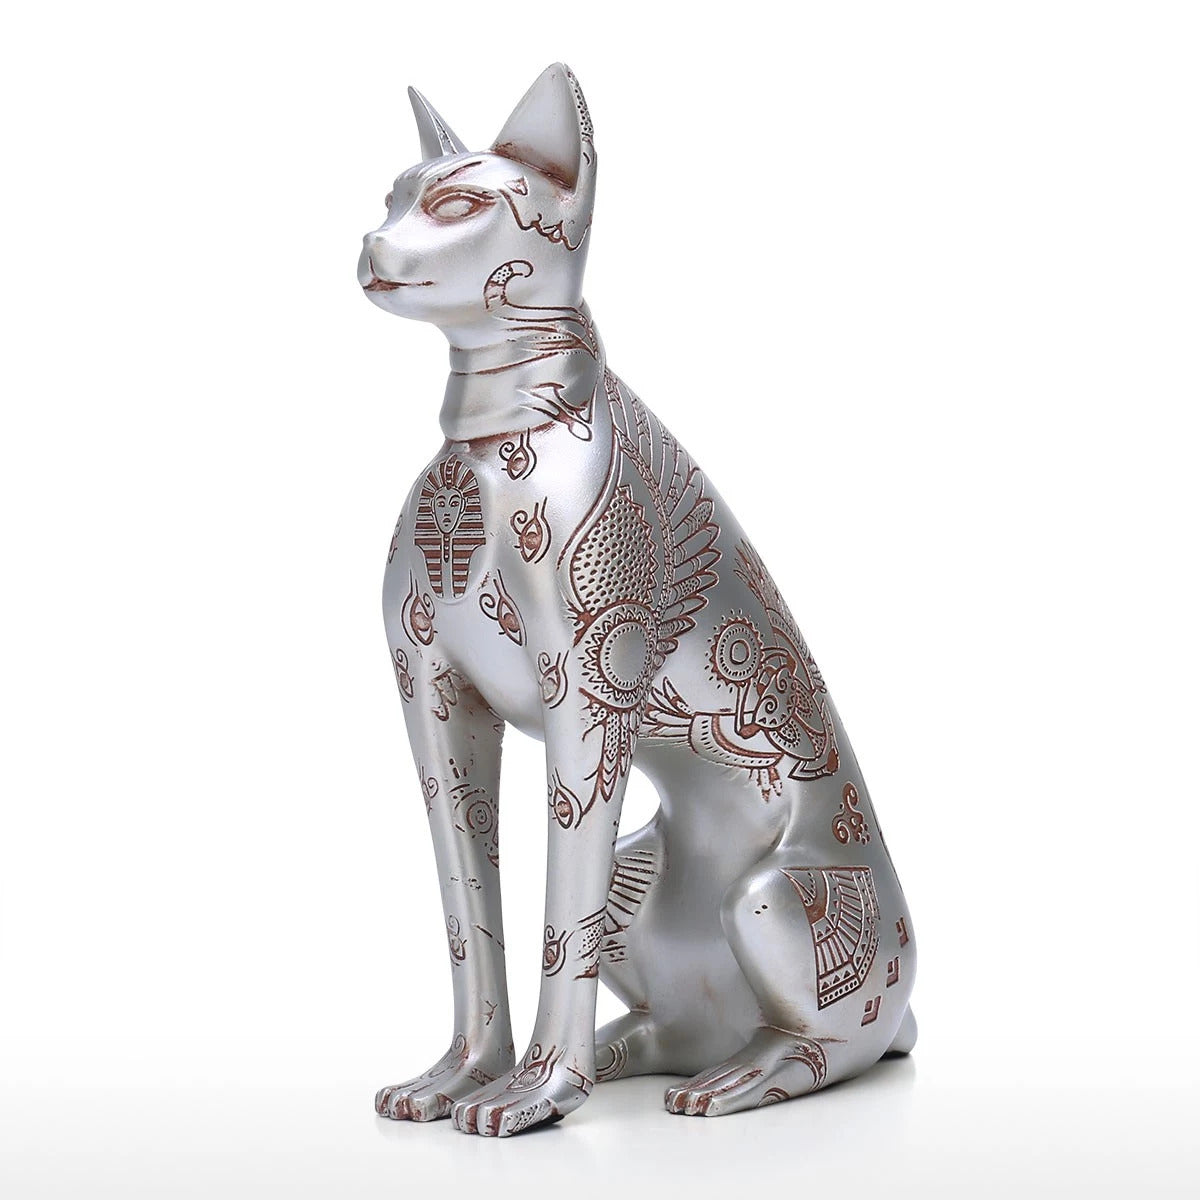 Egyptian Cat Statue For Gifts & Decor by Great Sphinx of Giza